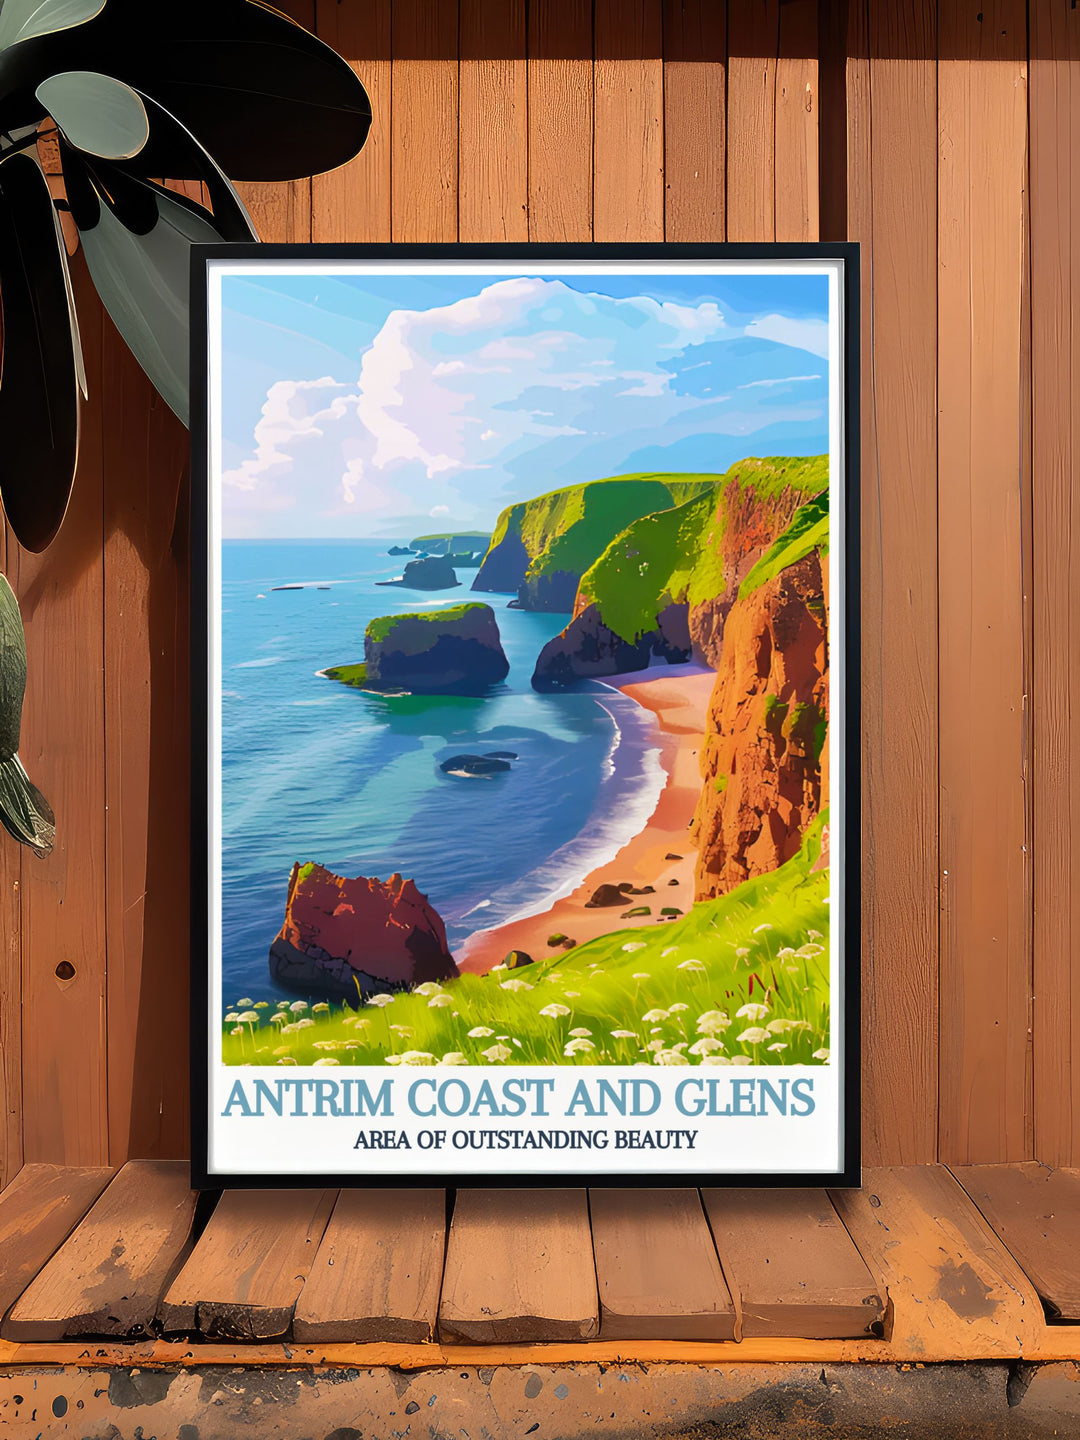 Art print of Northern Irelands rugged coastline, emphasizing the raw beauty of the Antrim Coast and Glens AONB.